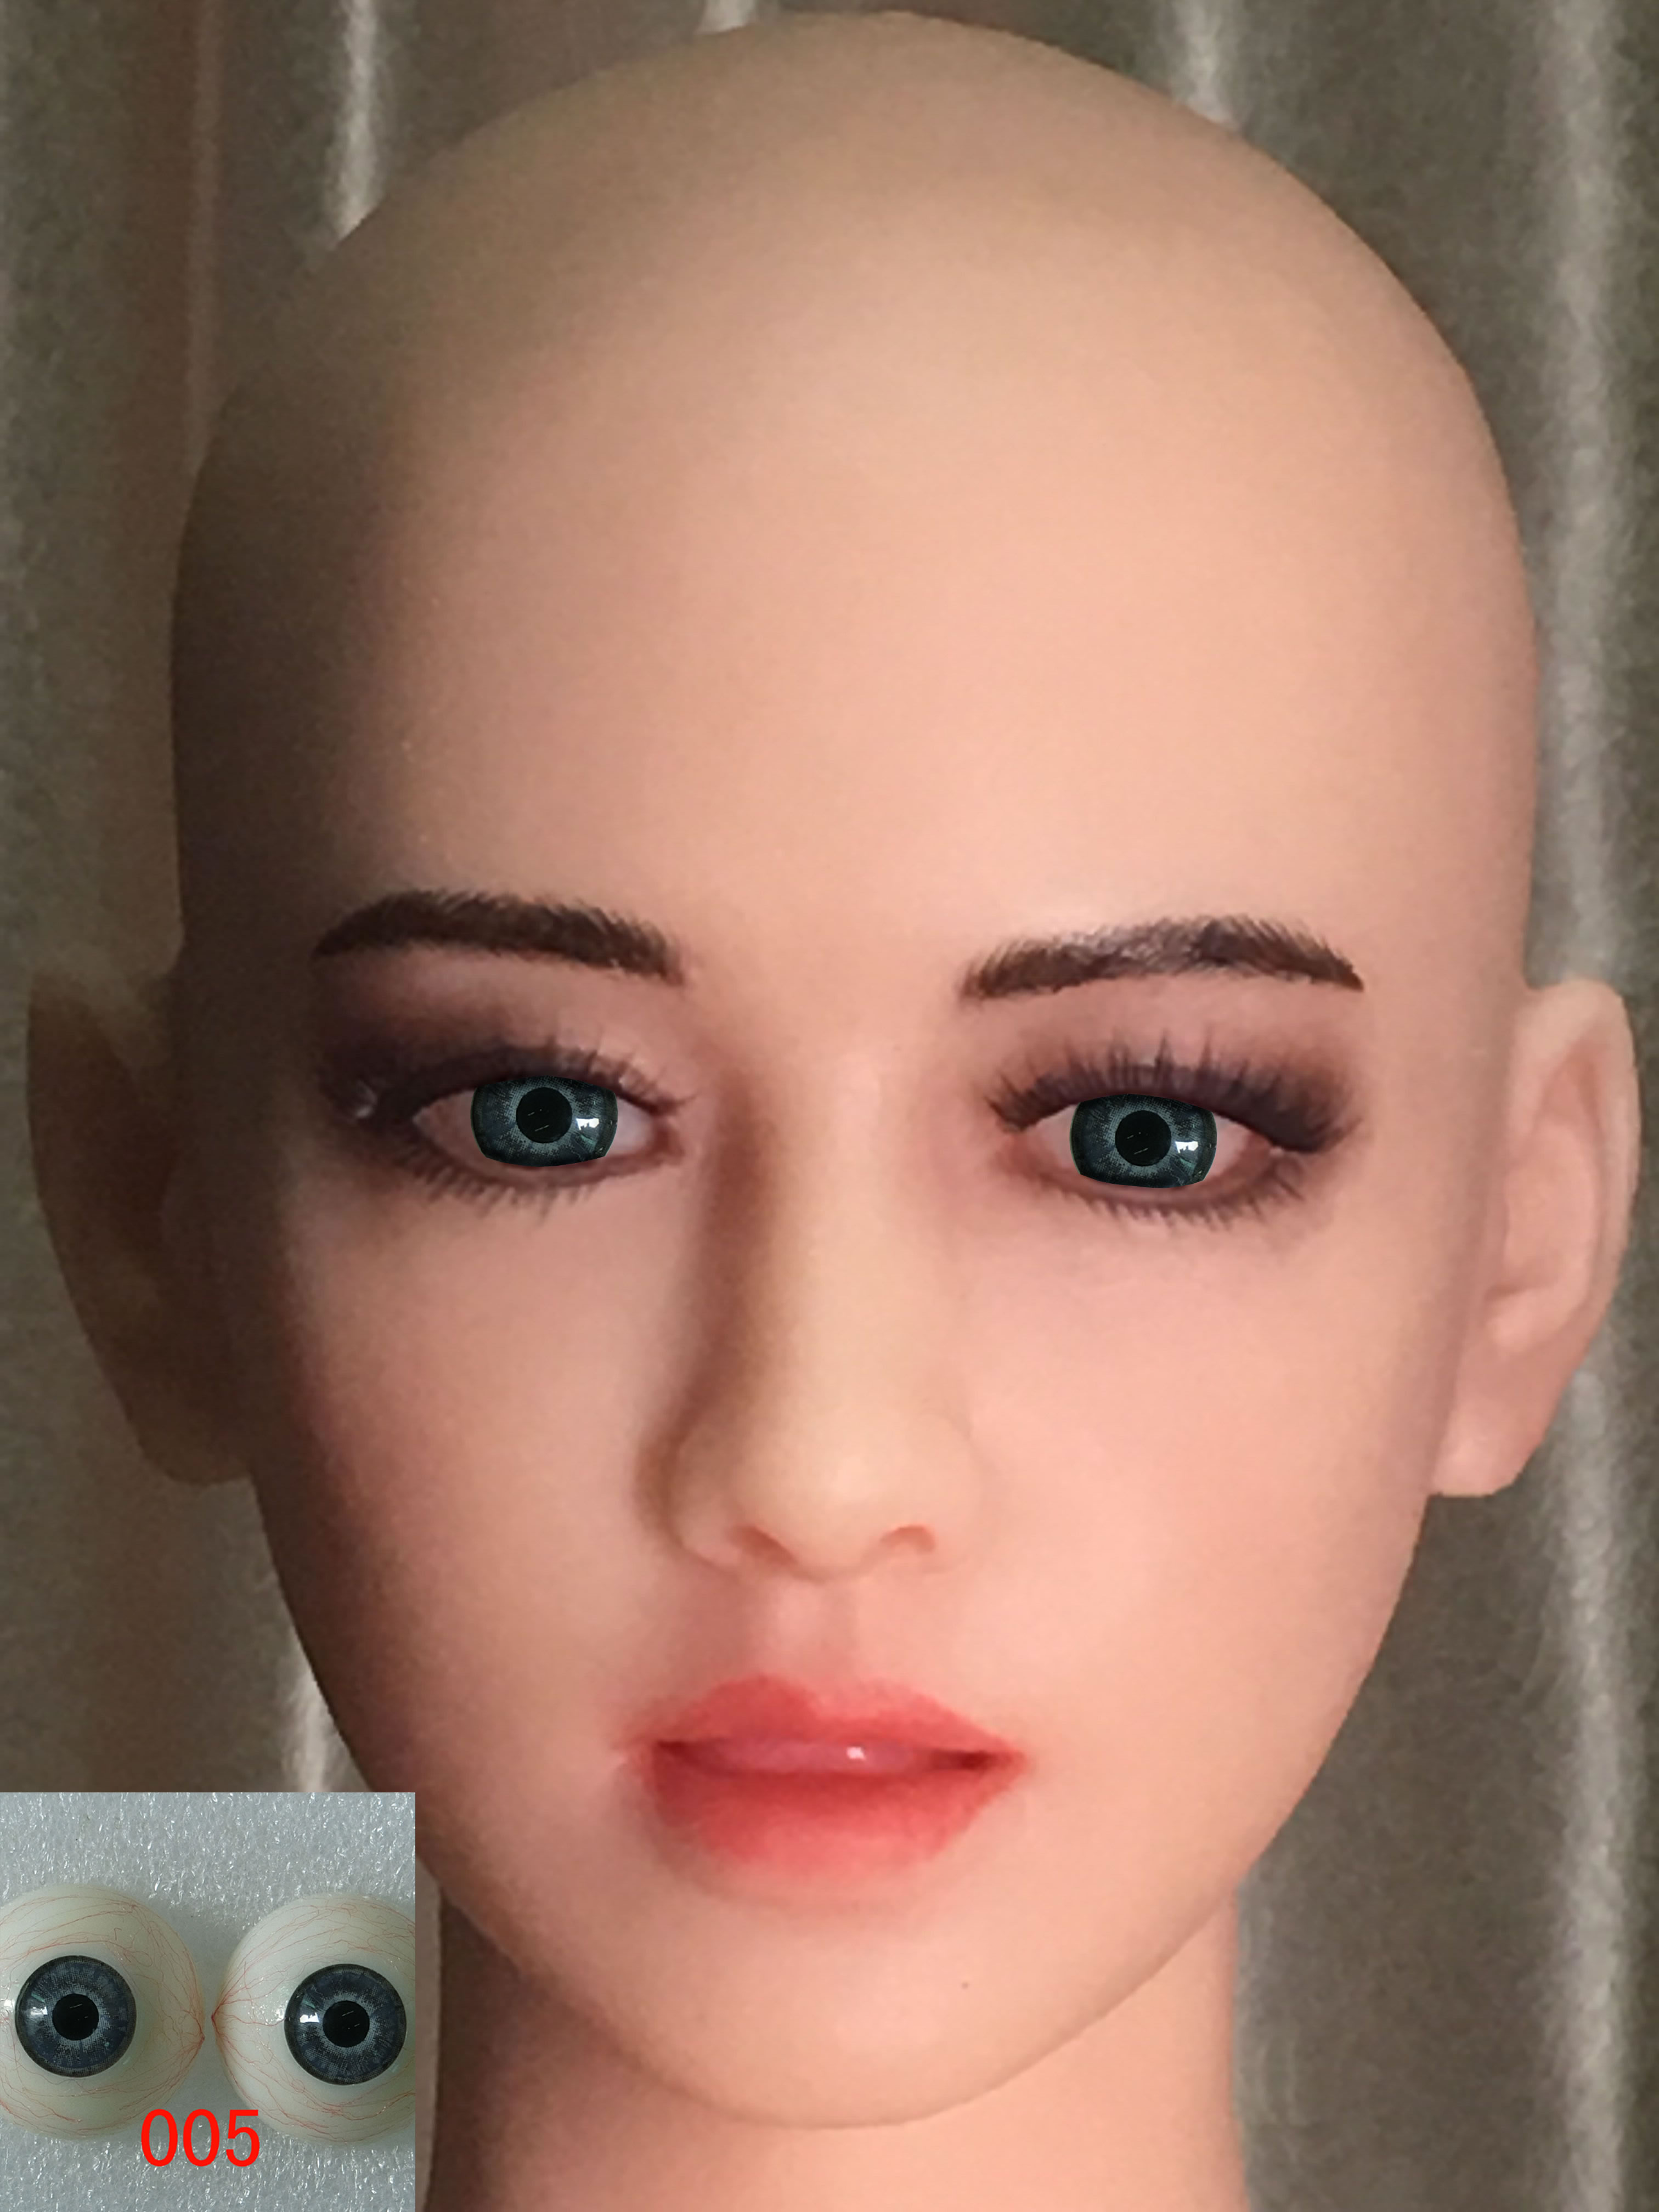 Online shopping-jmdoll,silicone doll, sexdoll, JM doll sorted by. 